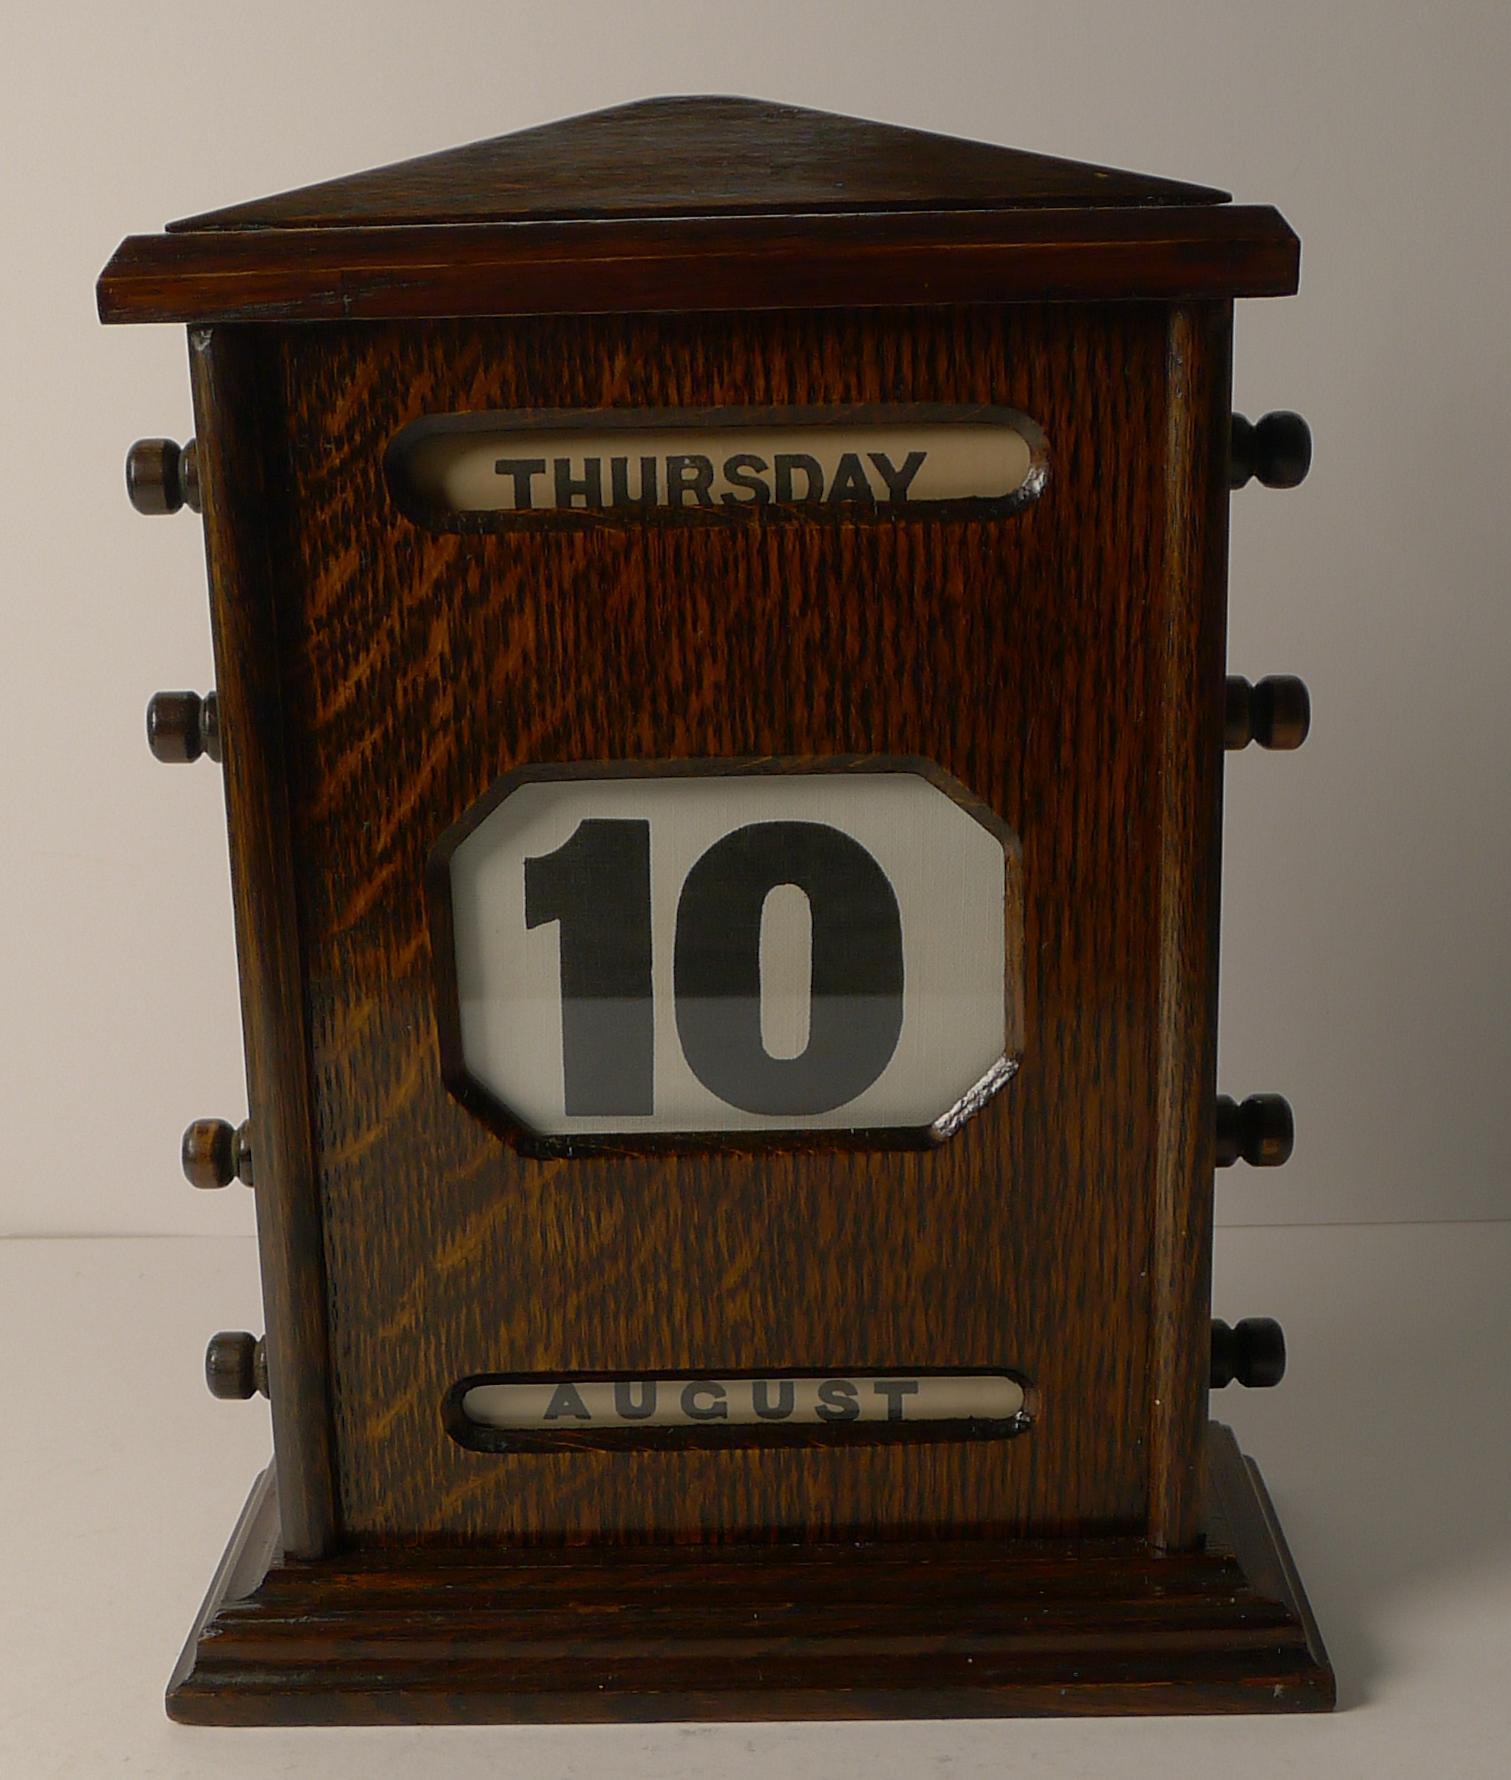 A good large Edwardian perpetual calendar made from solid English Oak. The keys either side are used to forward and return the rollers inside, changing the day, date and month.

Dating to c.1900, it remains in excellent condition.

A good size